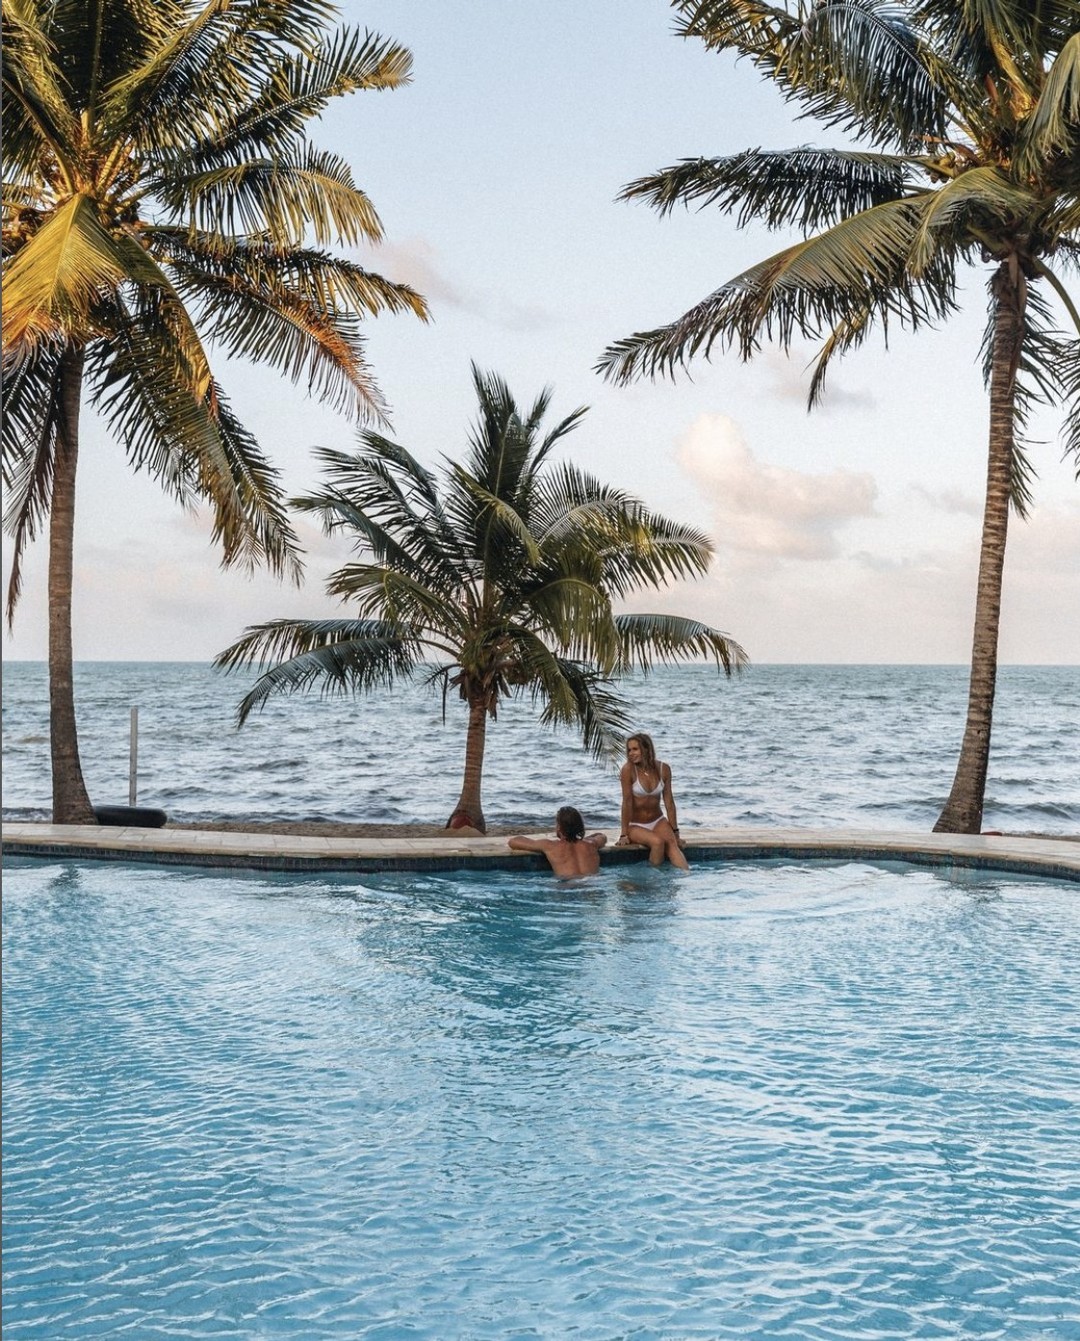 In Belize, the toughest decision you might have to make is to lounge at the pool or the beach. Which do you choose? #travelbelize

📸- @almond.beach.resort